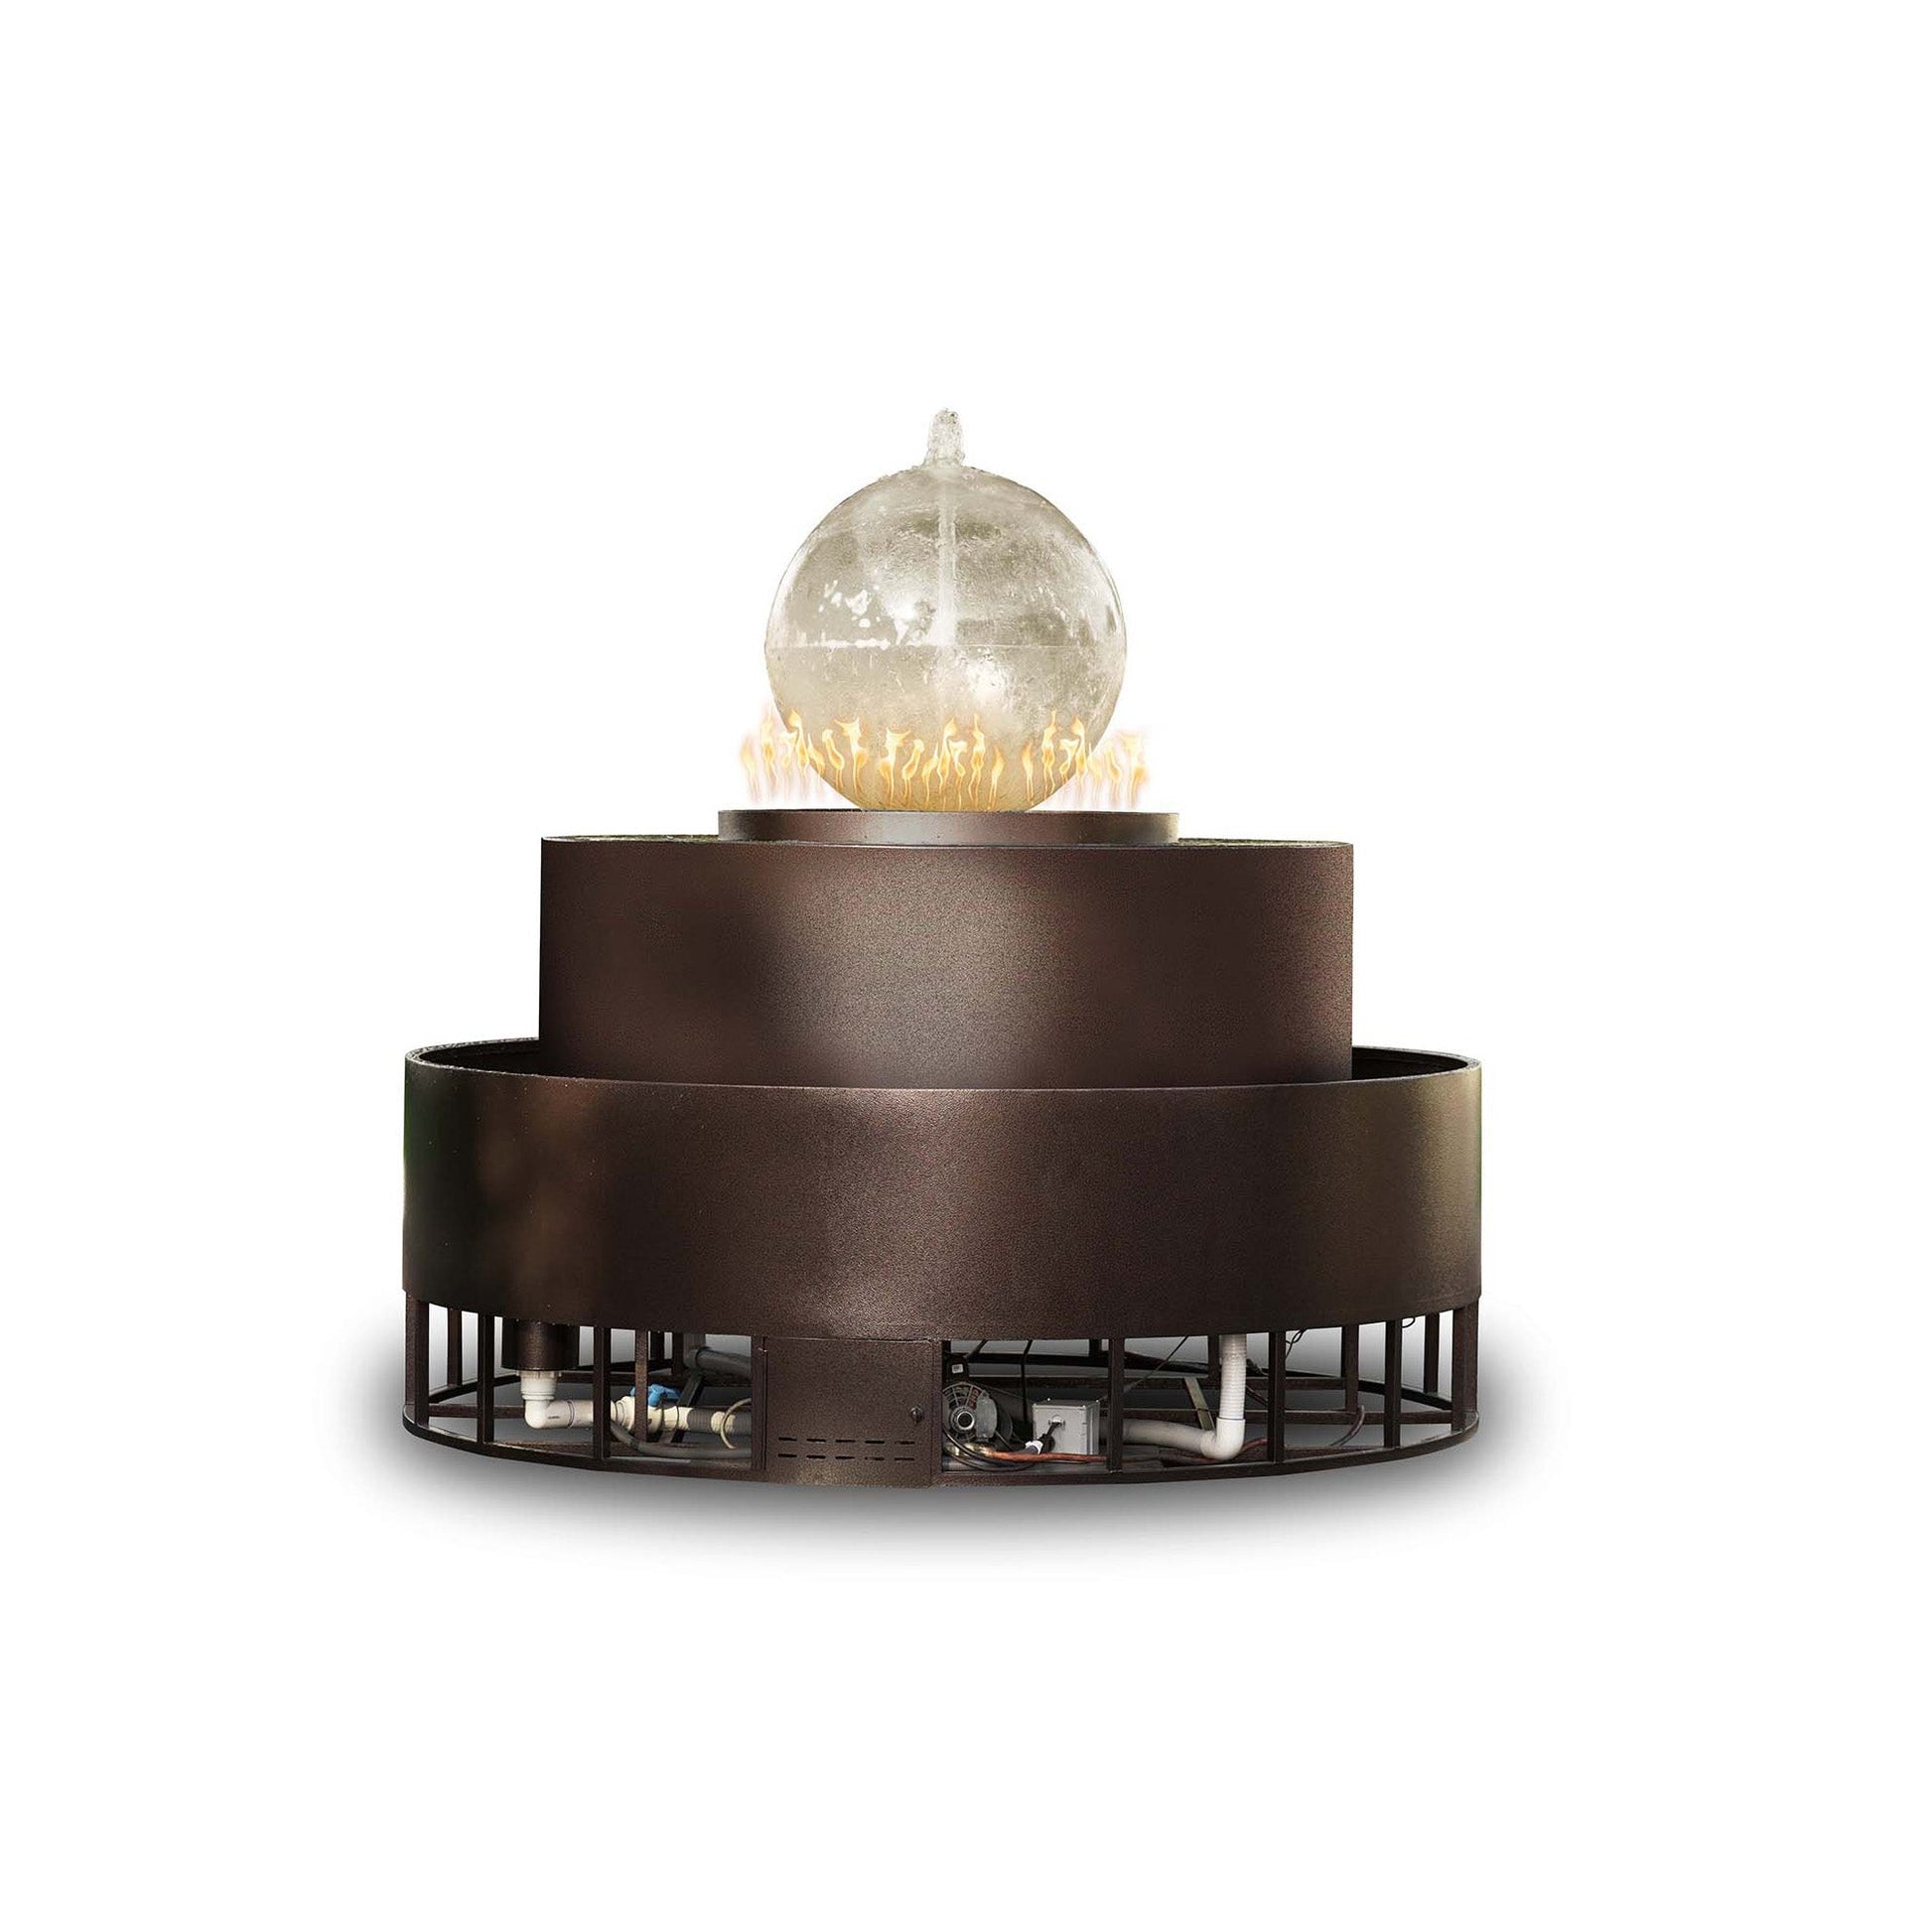 The Outdoor Plus Round Atlas 89" Copper Vein Powder Coated Natural Gas Fire & Water Fountain with 12V Electronic Ignition